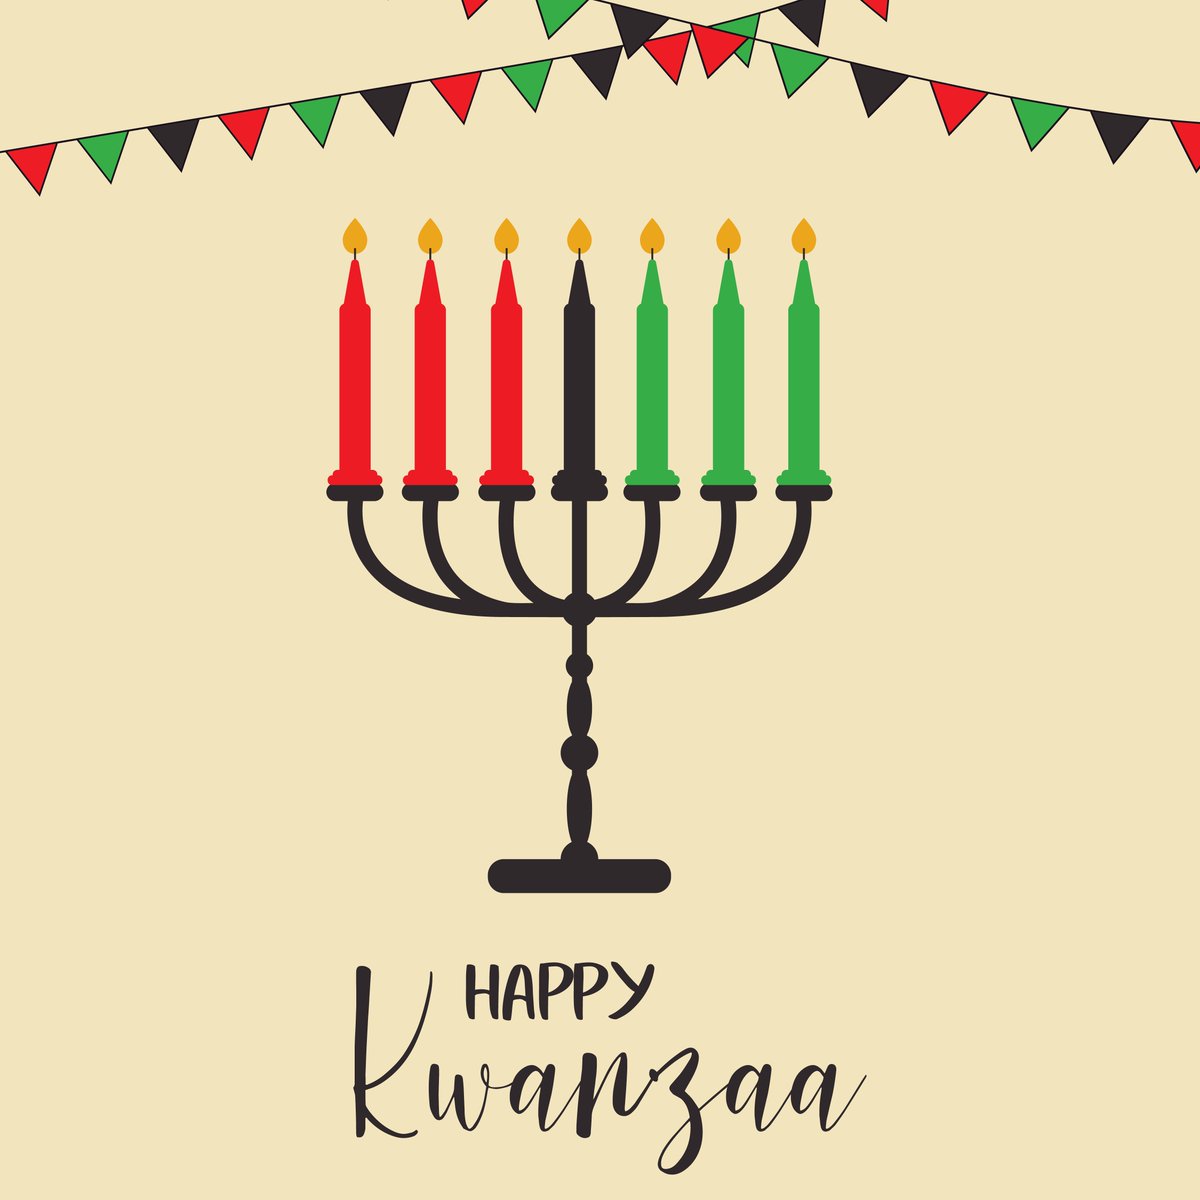 Gathering together to light the kinara in honor of Kwanzaa, we celebrate the principles of unity, self-determination, and collective work and responsibility. Happy Kwanzaa!